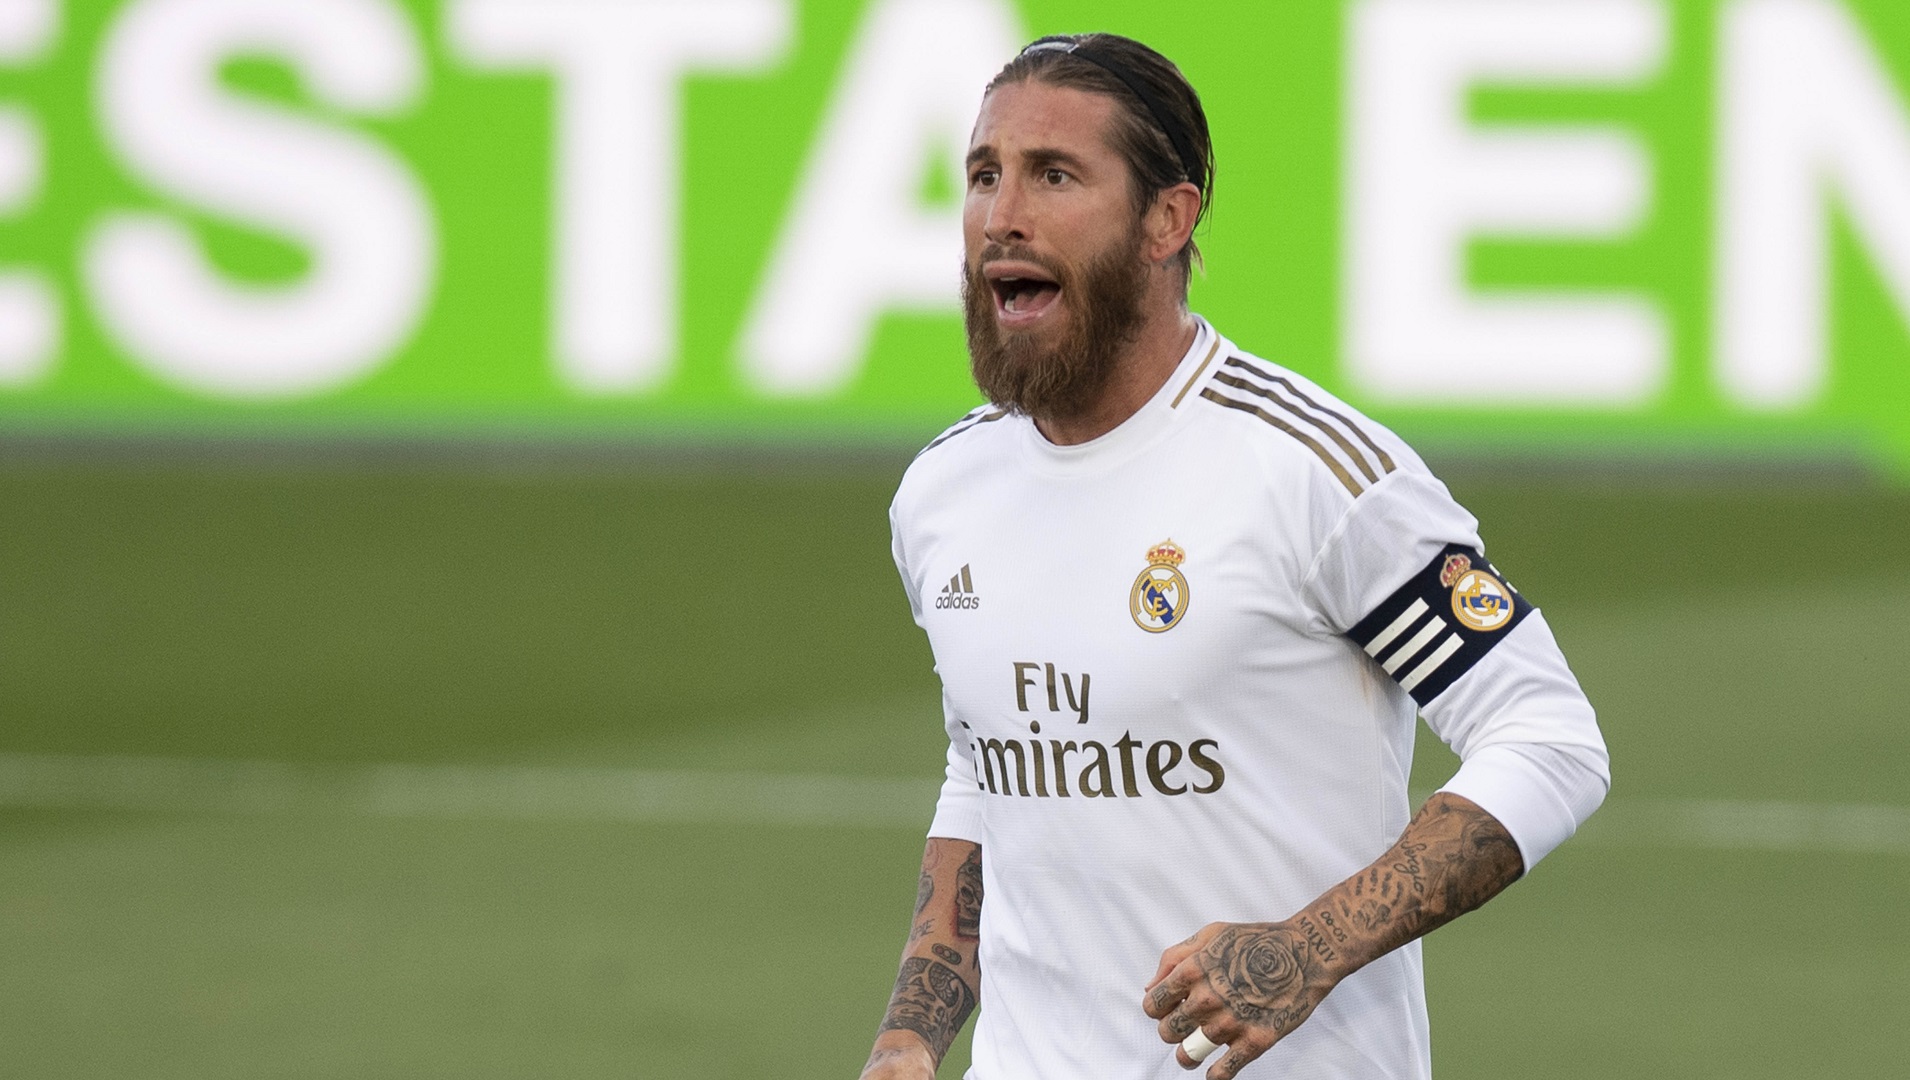 Madrid can't repeat Ronaldo mistake by letting Ramos leave, says Mijatovic